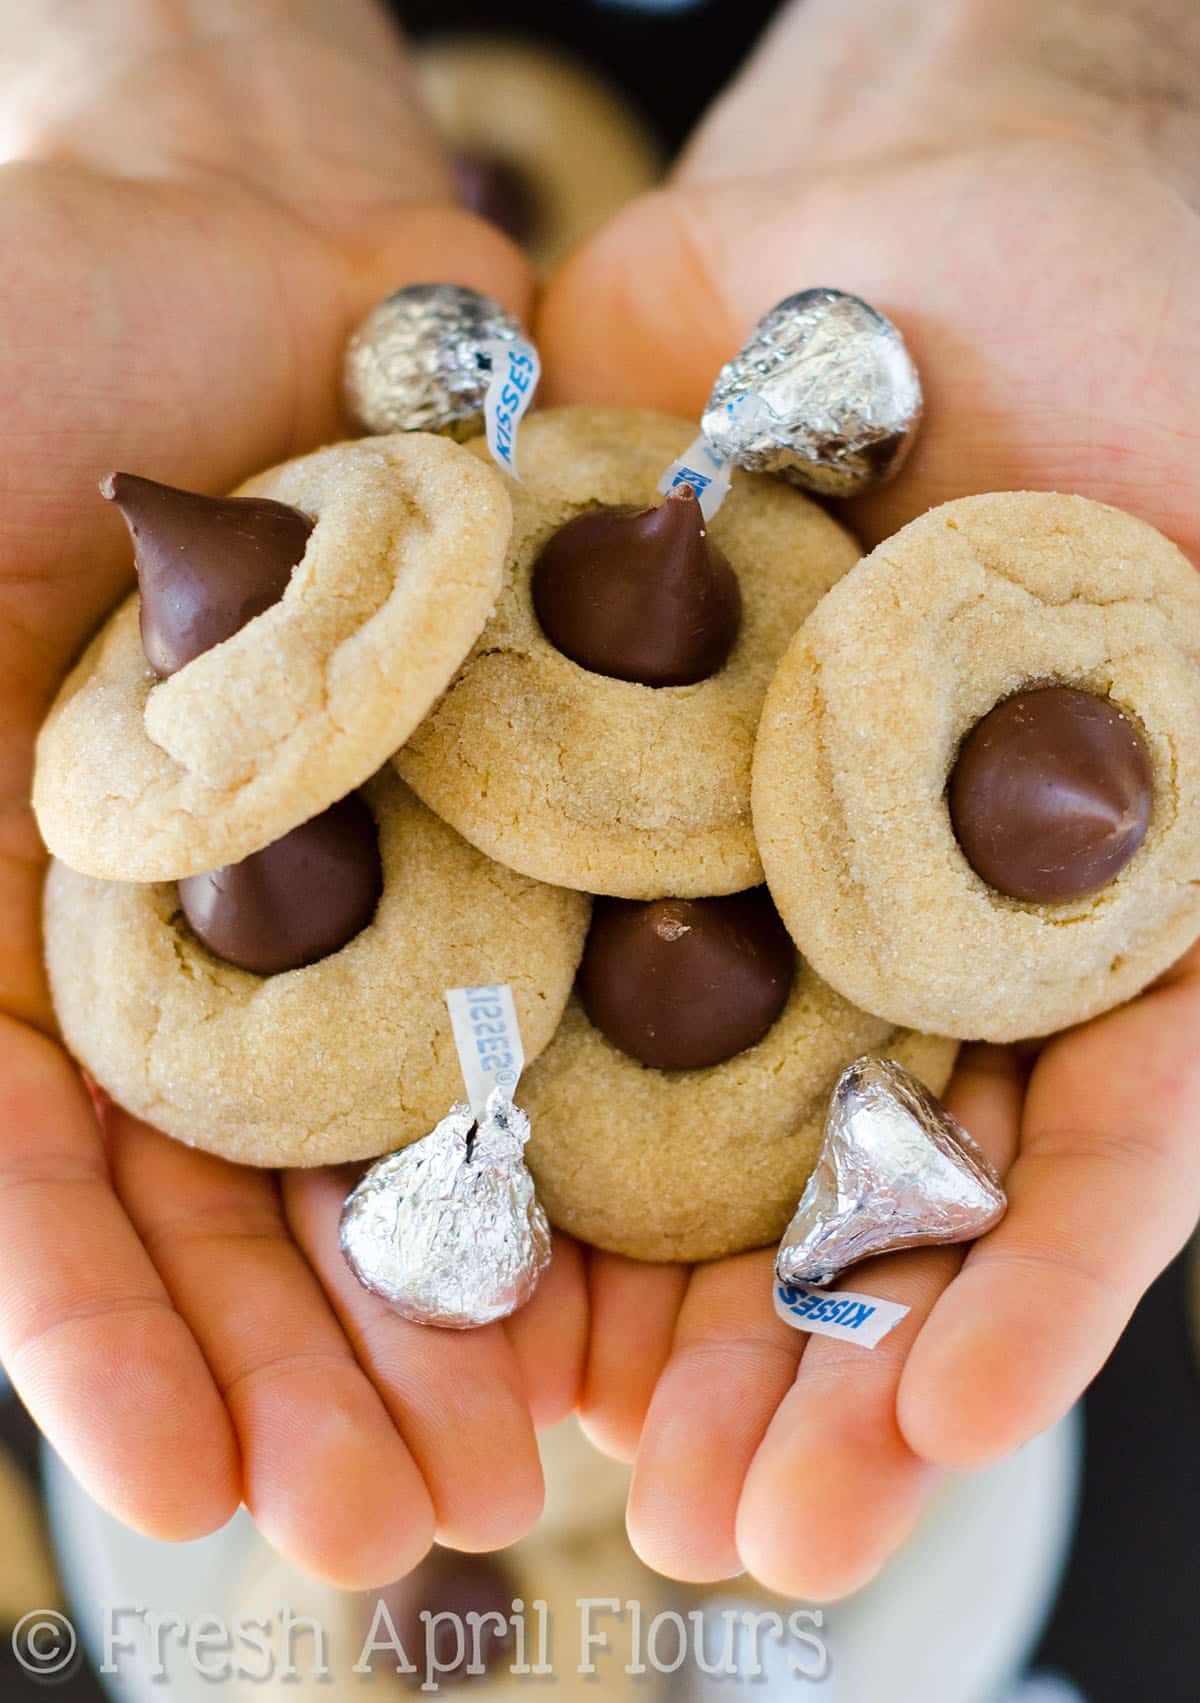 A man's two hands holding peanut butter blossom cookies and Hershey's Kisses.